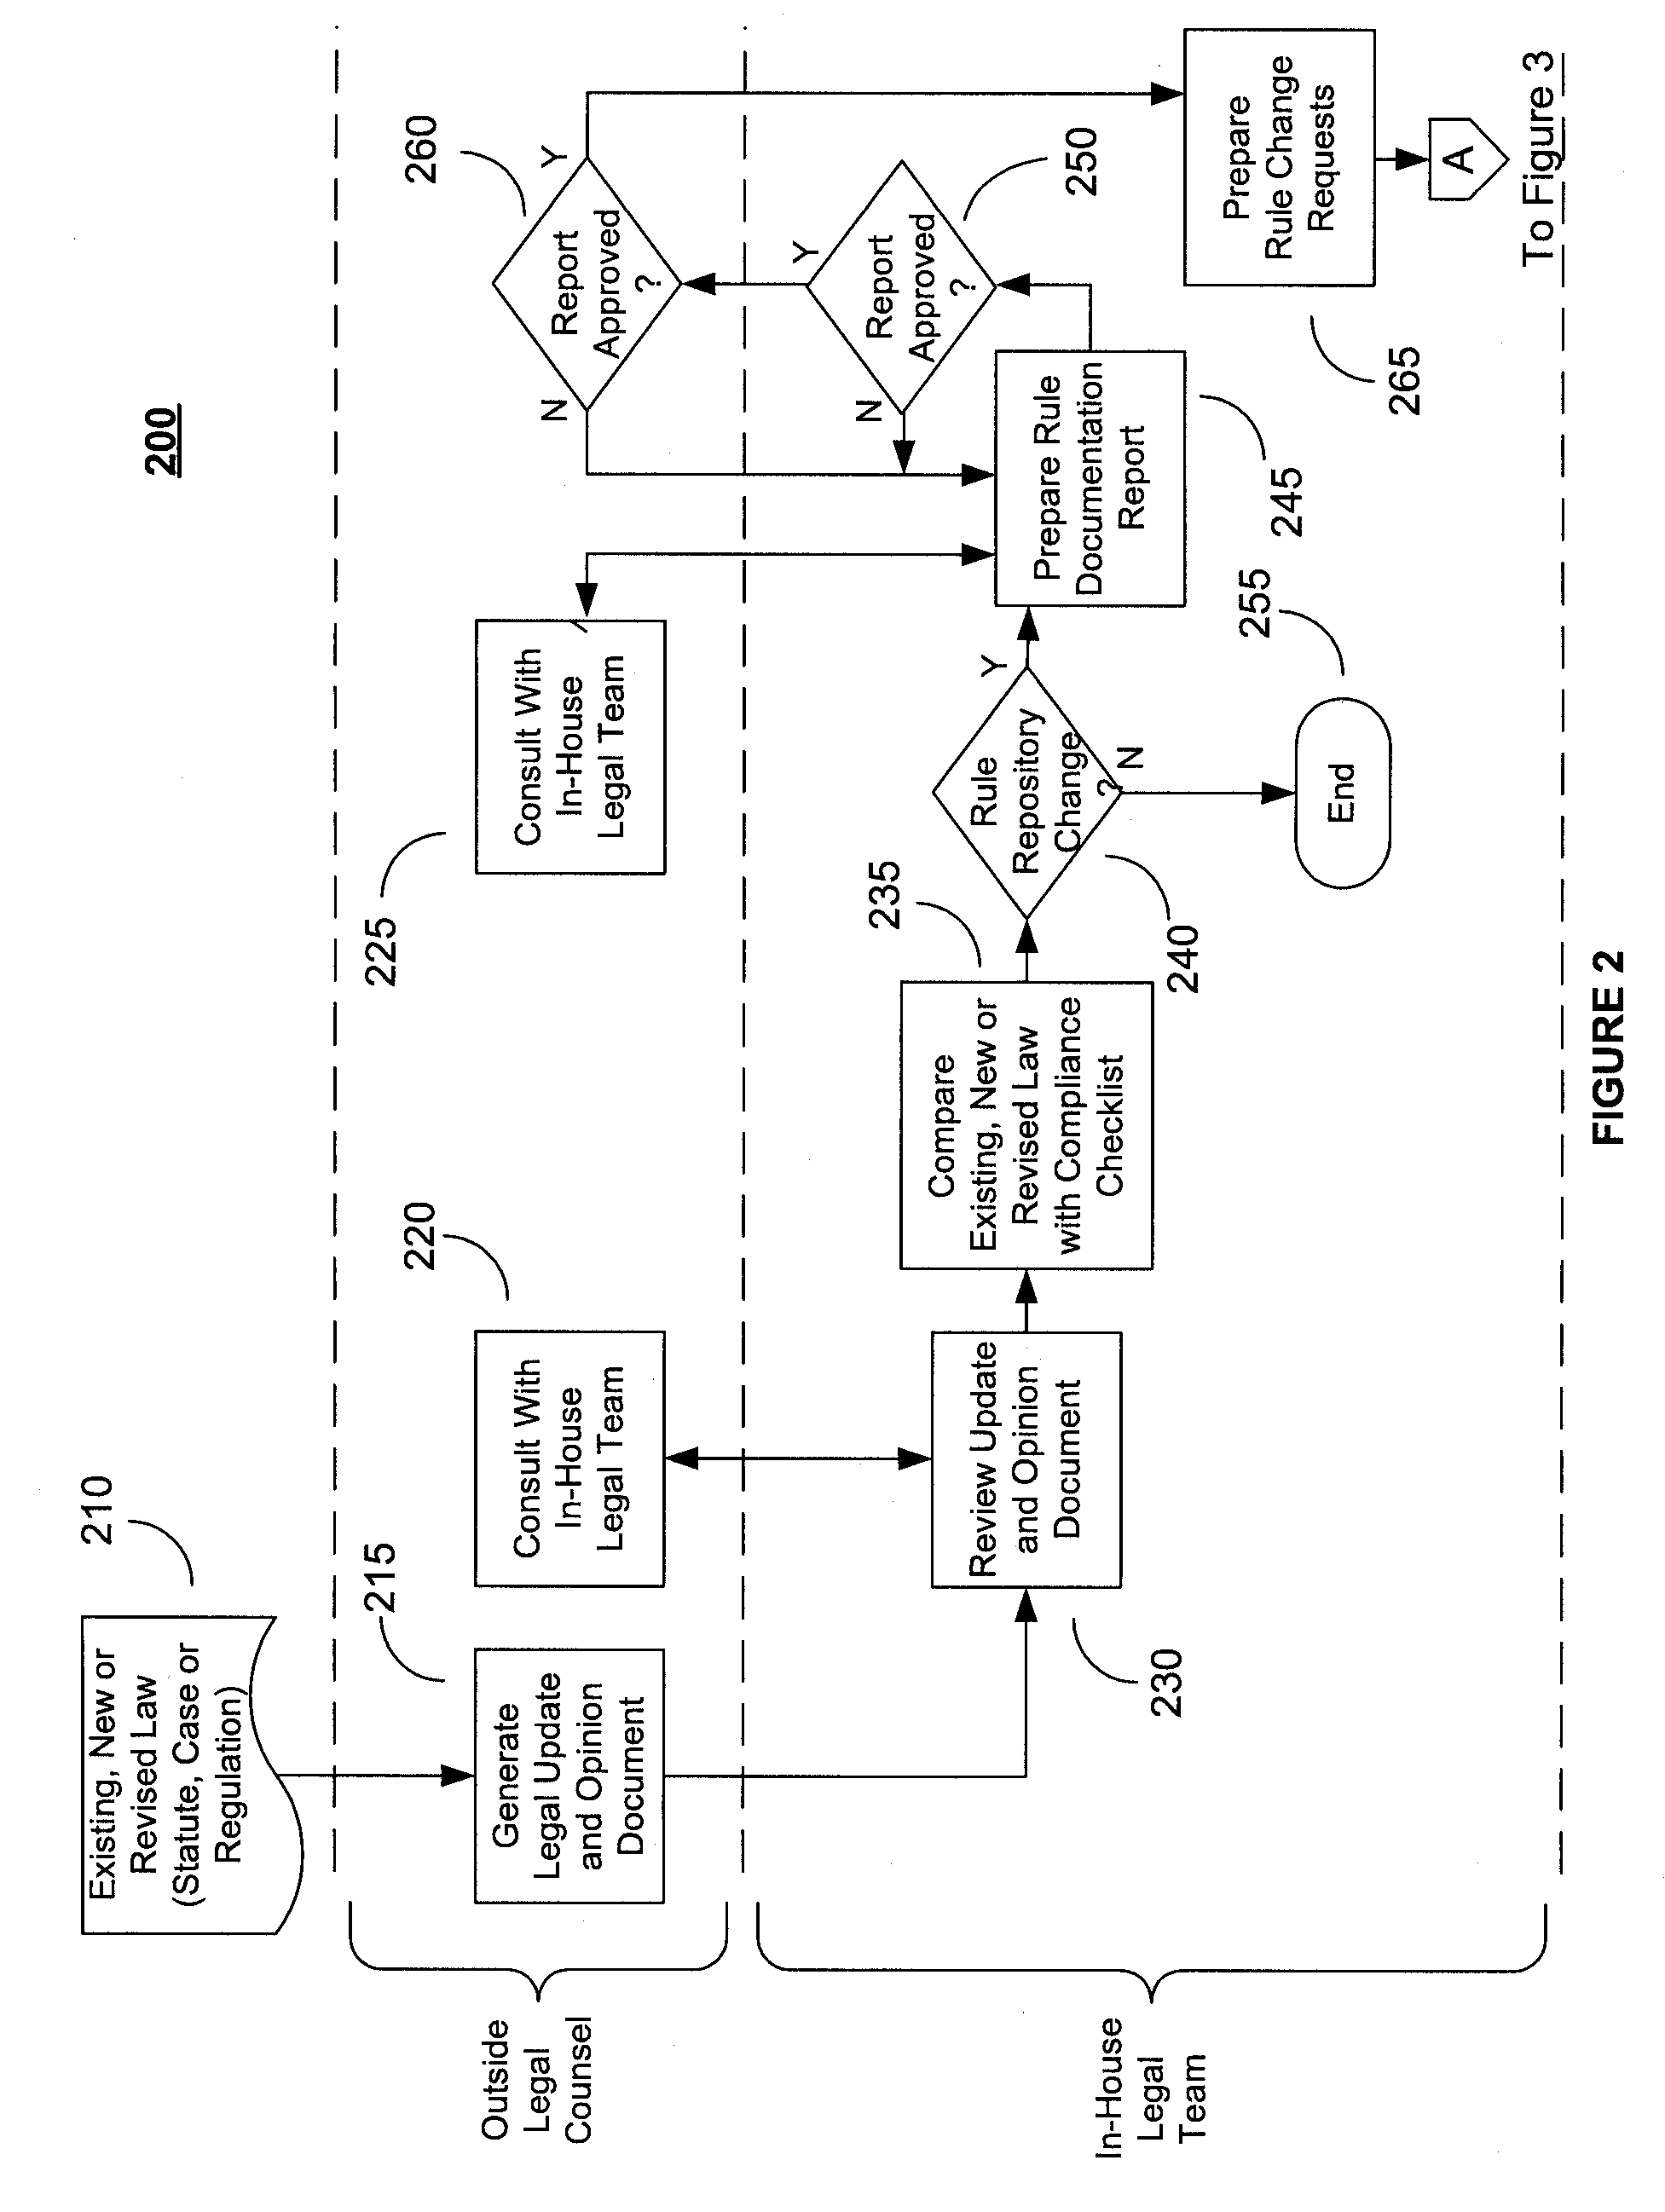 System and Method for Regulatory Rules Repository Generation and Maintenance